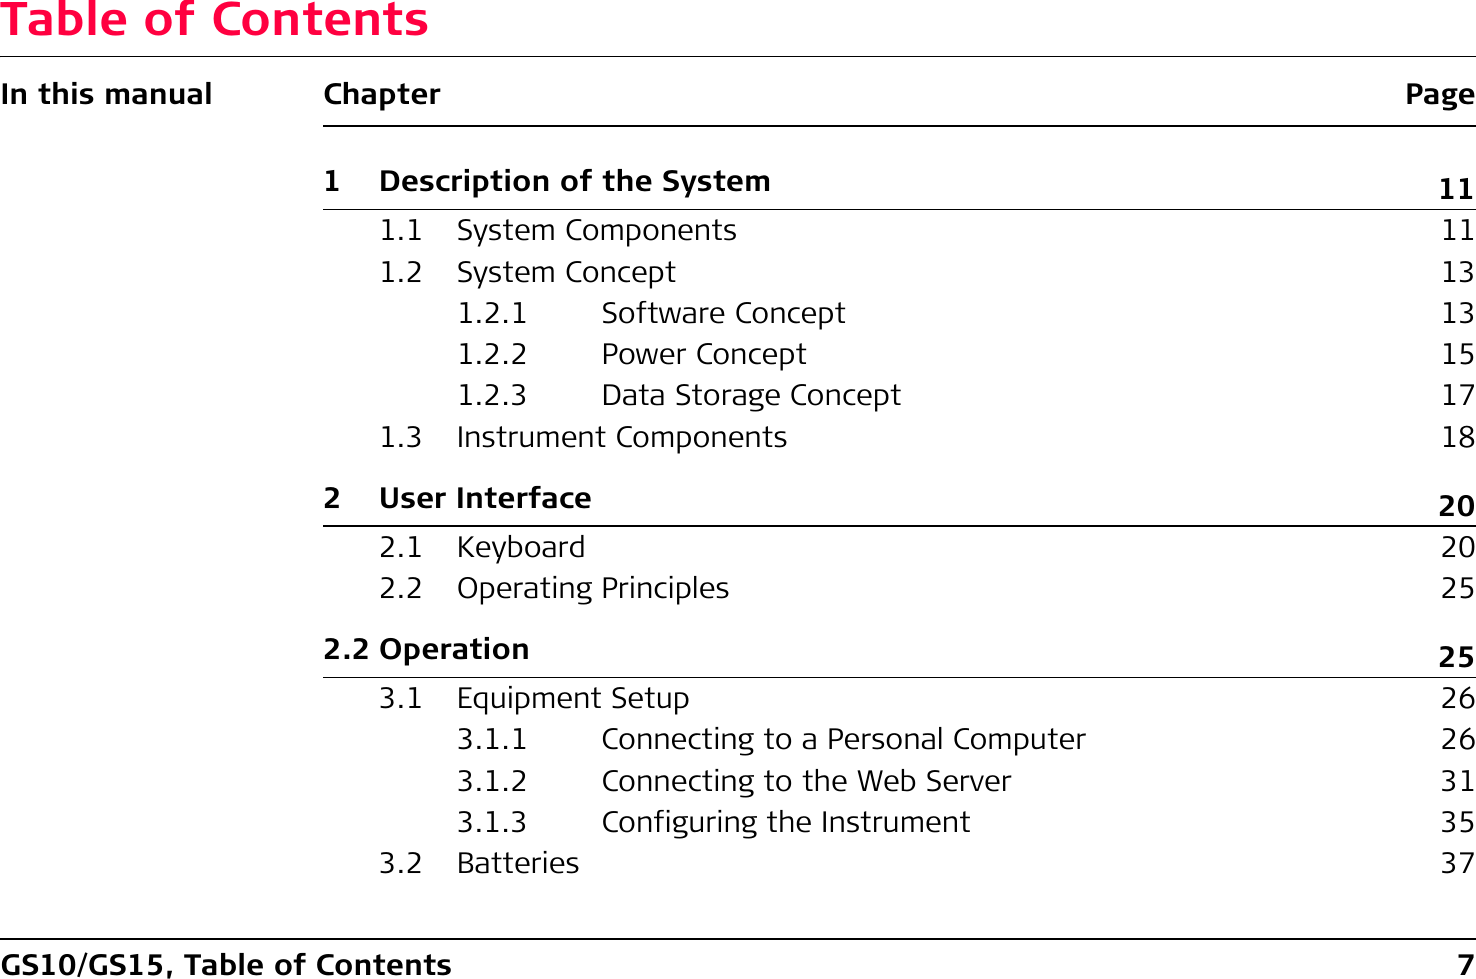 GS10/GS15, Table of Contents 7Table of ContentsIn this manual Chapter Page1 Description of the System 111.1 System Components 111.2 System Concept 131.2.1 Software Concept 131.2.2 Power Concept 151.2.3 Data Storage Concept 171.3 Instrument Components 182 User Interface 202.1 Keyboard 202.2 Operating Principles 252.2 Operation 253.1 Equipment Setup 263.1.1 Connecting to a Personal Computer 263.1.2 Connecting to the Web Server 313.1.3 Configuring the Instrument 353.2 Batteries 37